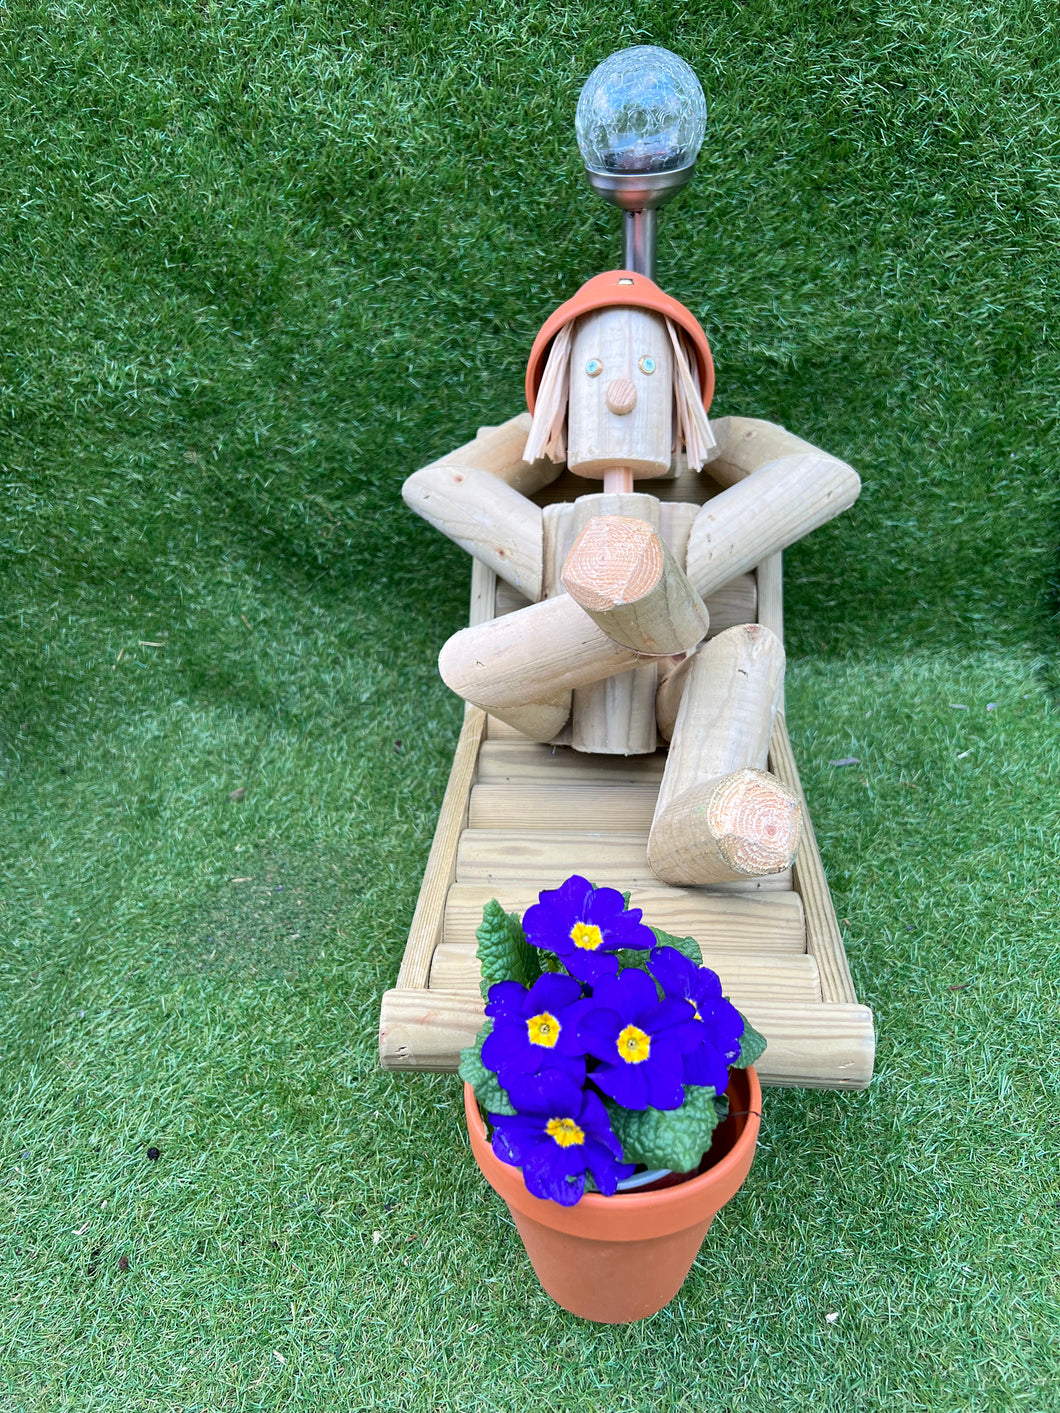 Man on a deck chair with a solar lamp